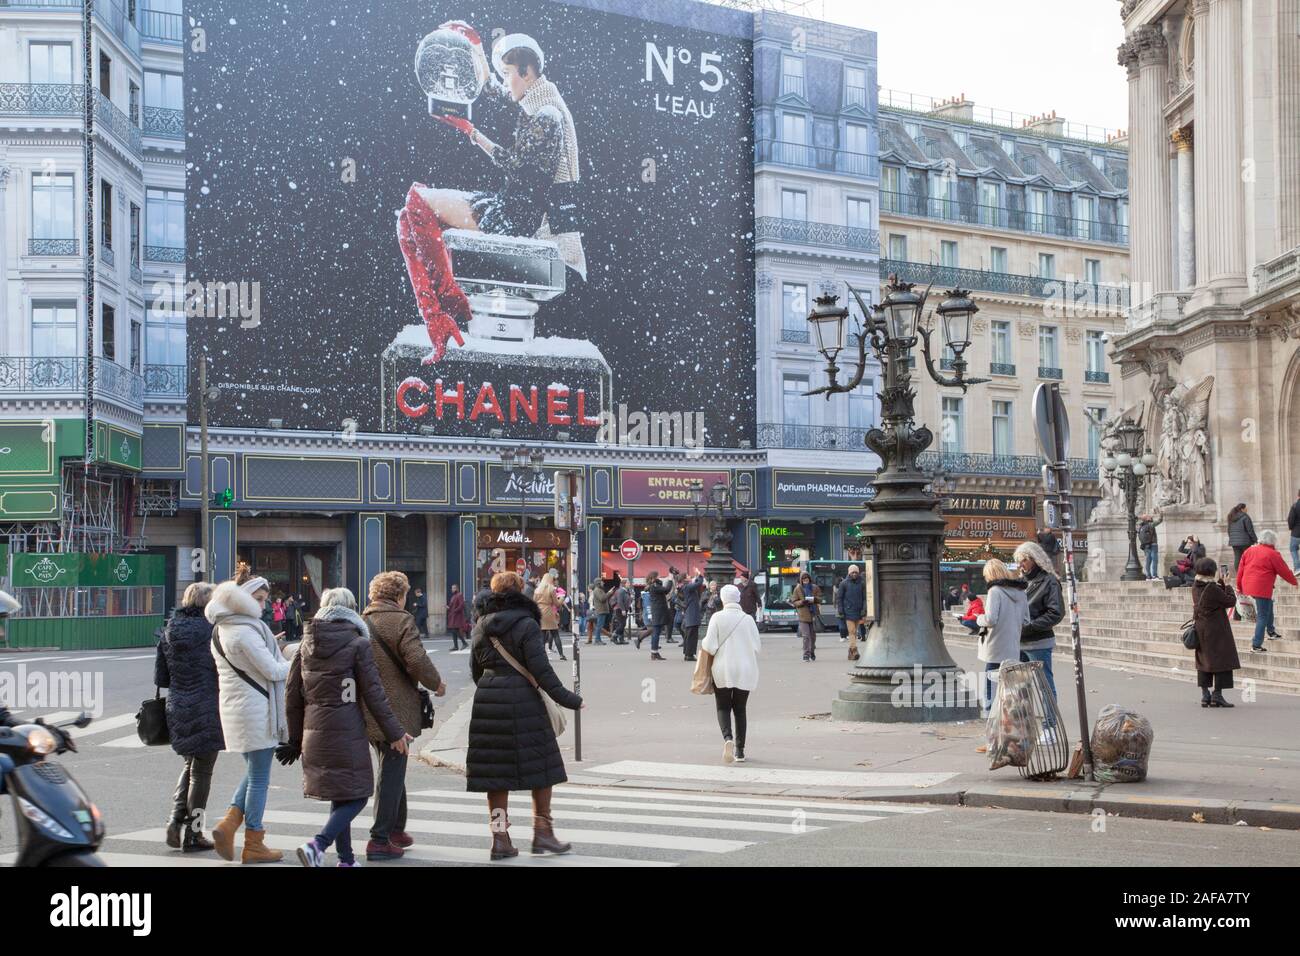 Pedestrians outside the Paris Opera building and a huge advert for Chanel No.5 perfume. Christmas 2019 Stock Photo